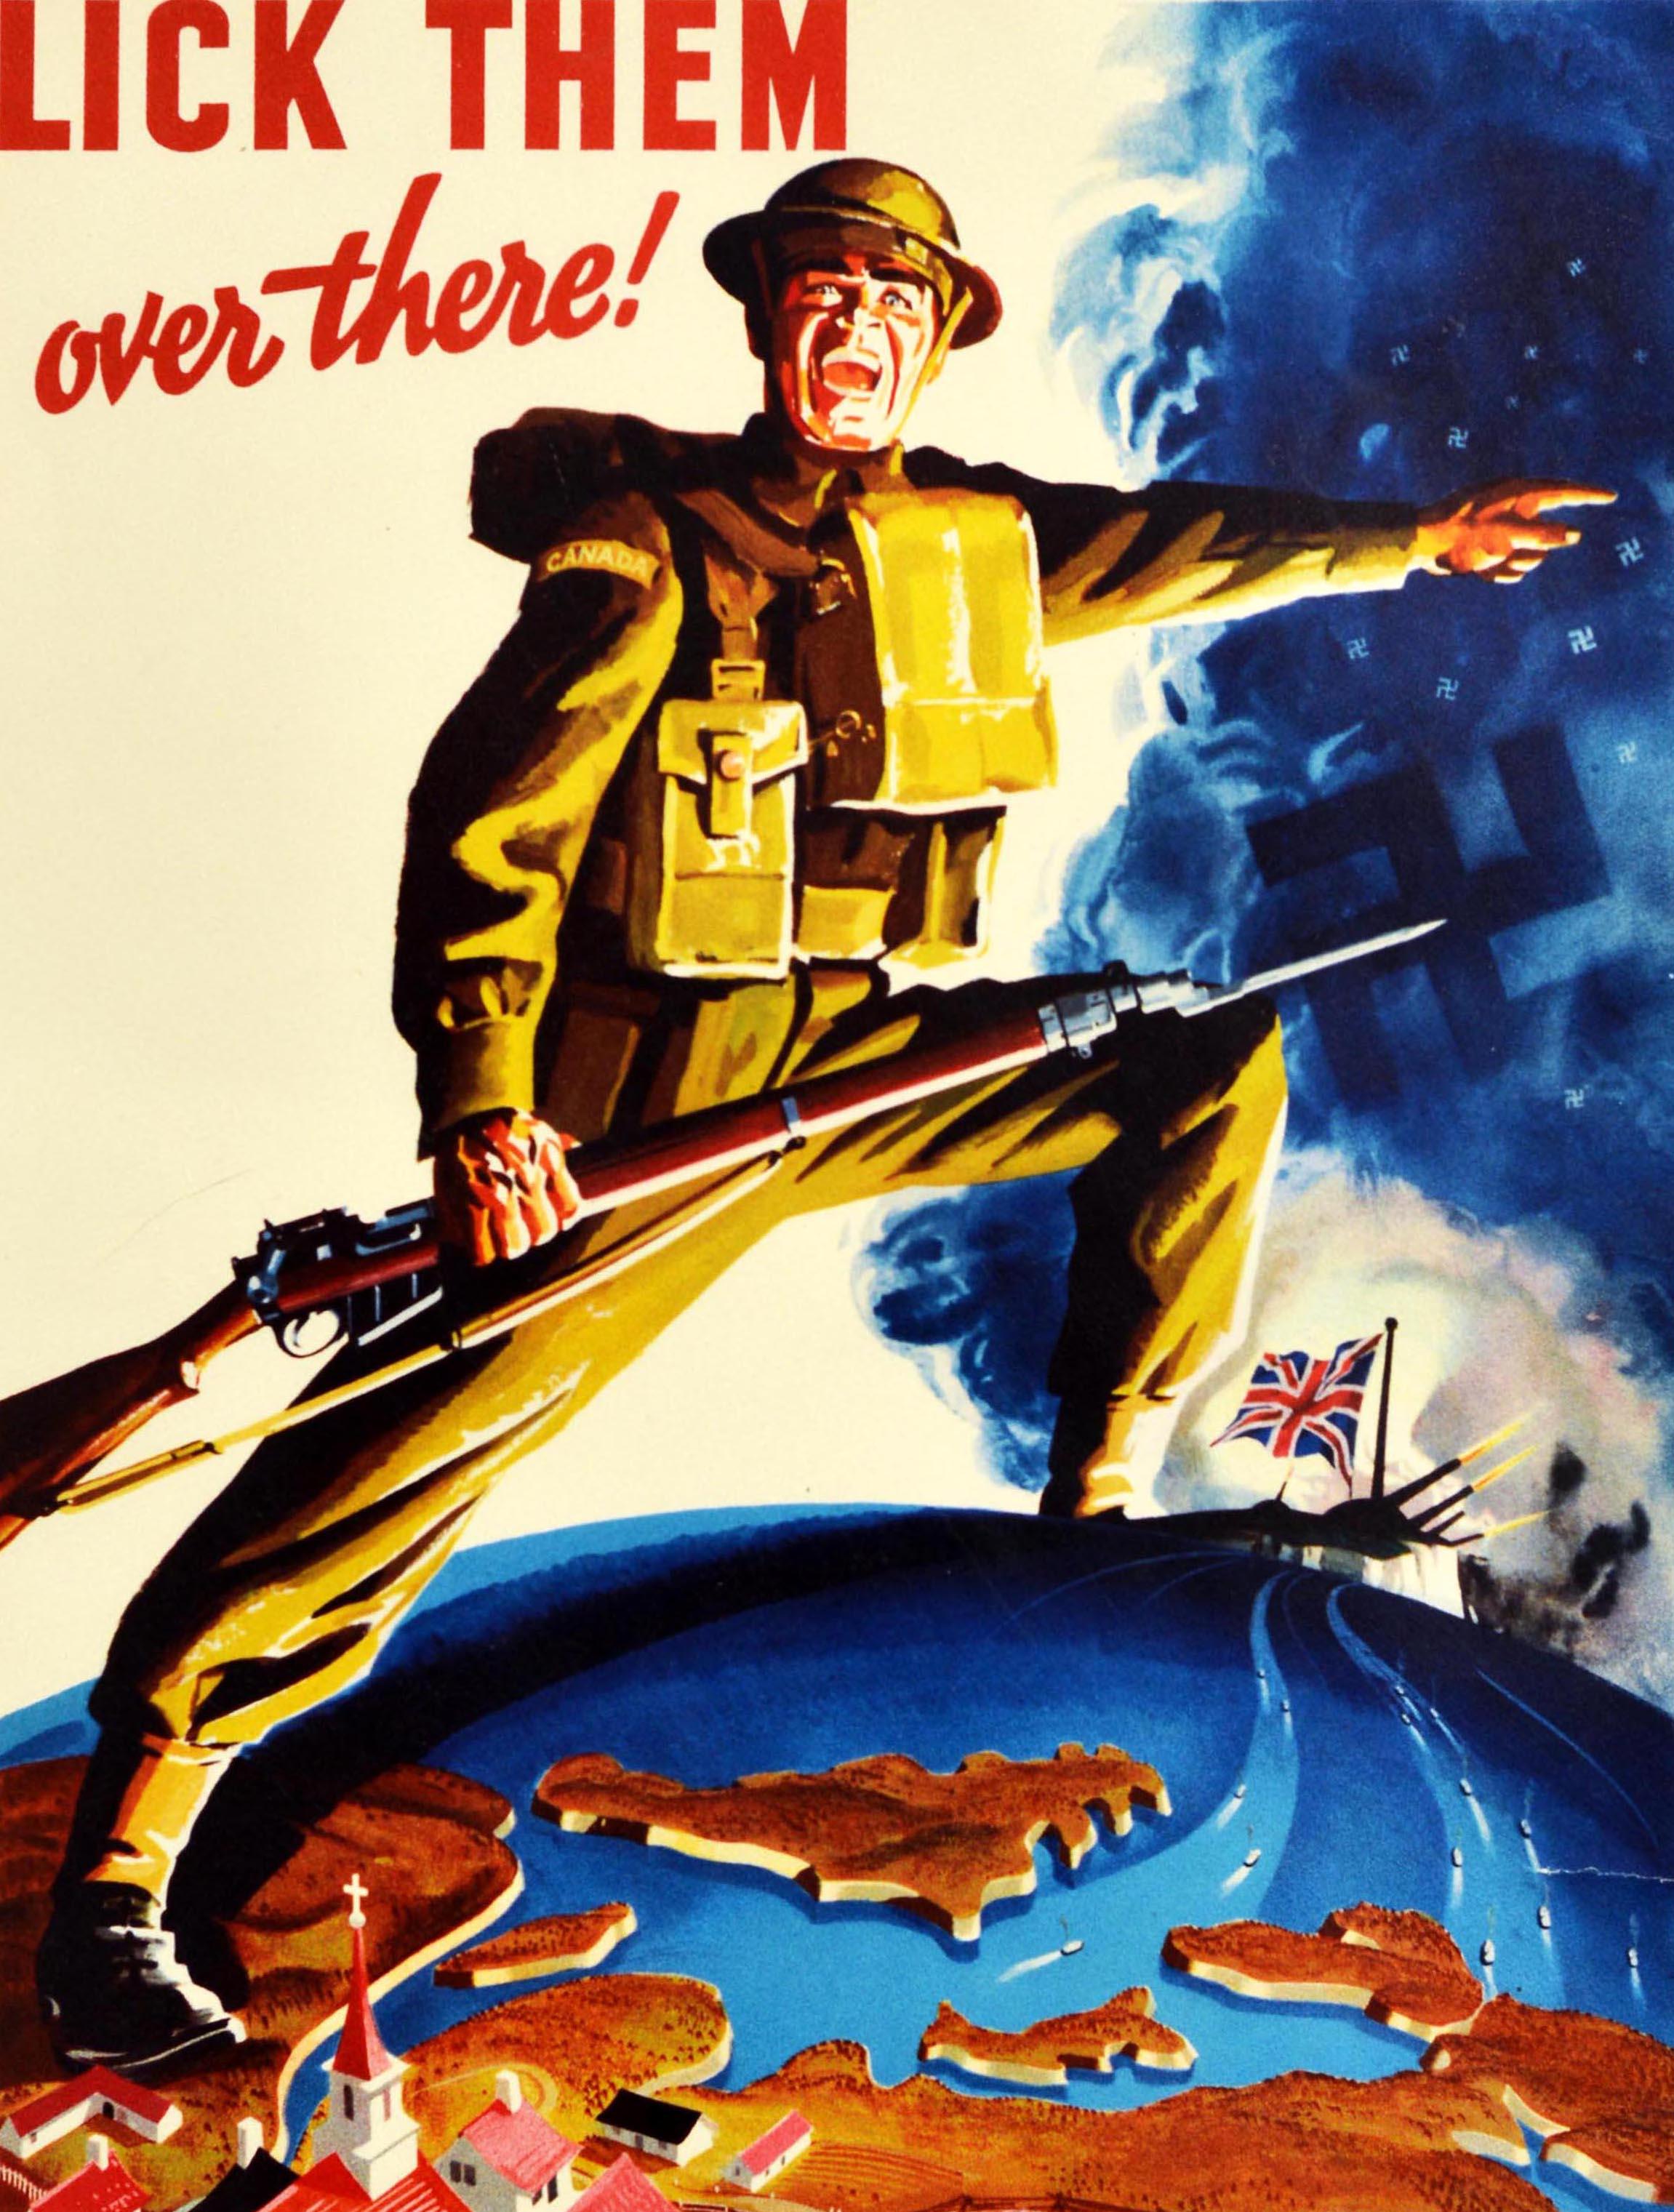 Original vintage World War Two poster - Lick Them Over There! Come On Canada! - featuring a dramatic image depicting soldier in uniform holding a bayonet rifle gun in one hand and looking at the viewer, pointing towards Nazi German Swastika symbols